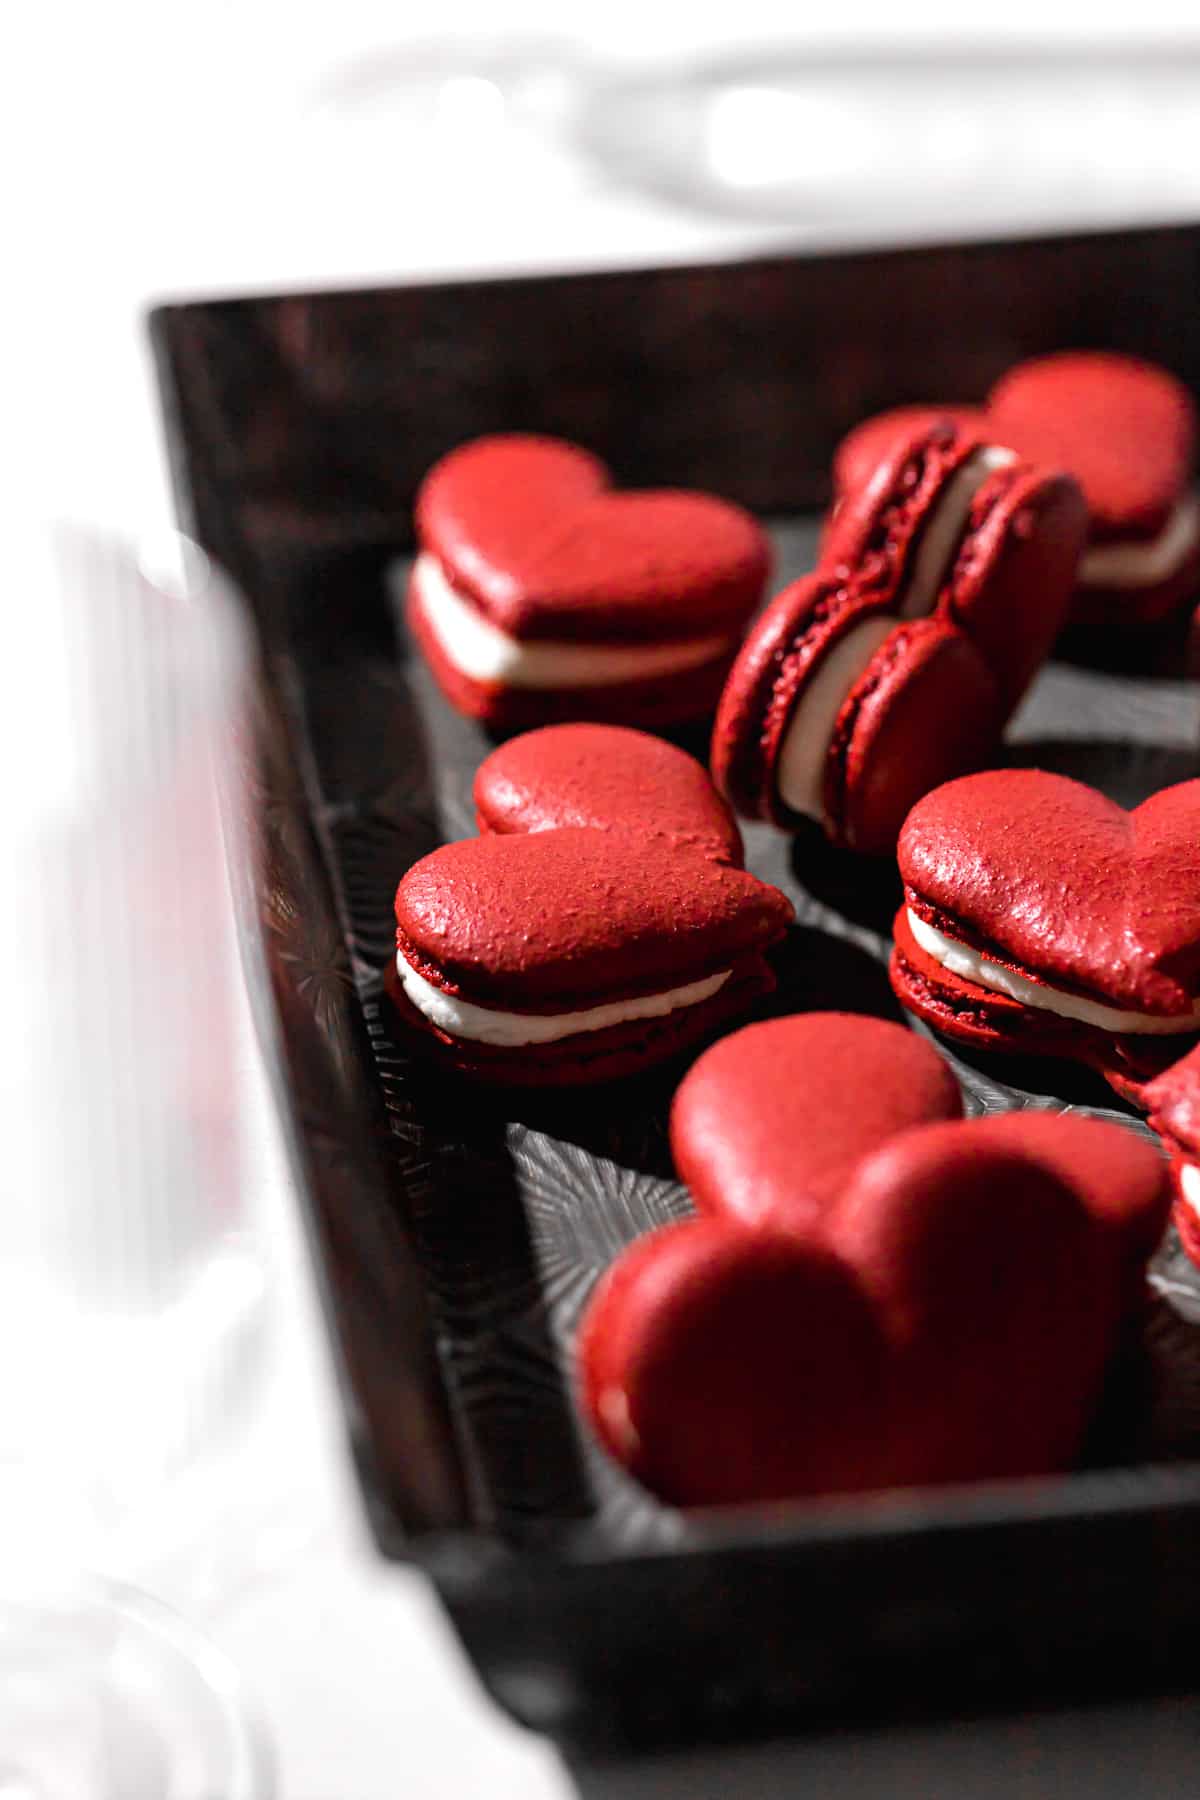 valentines macarons filled with mascarpone frosting in textured tray.